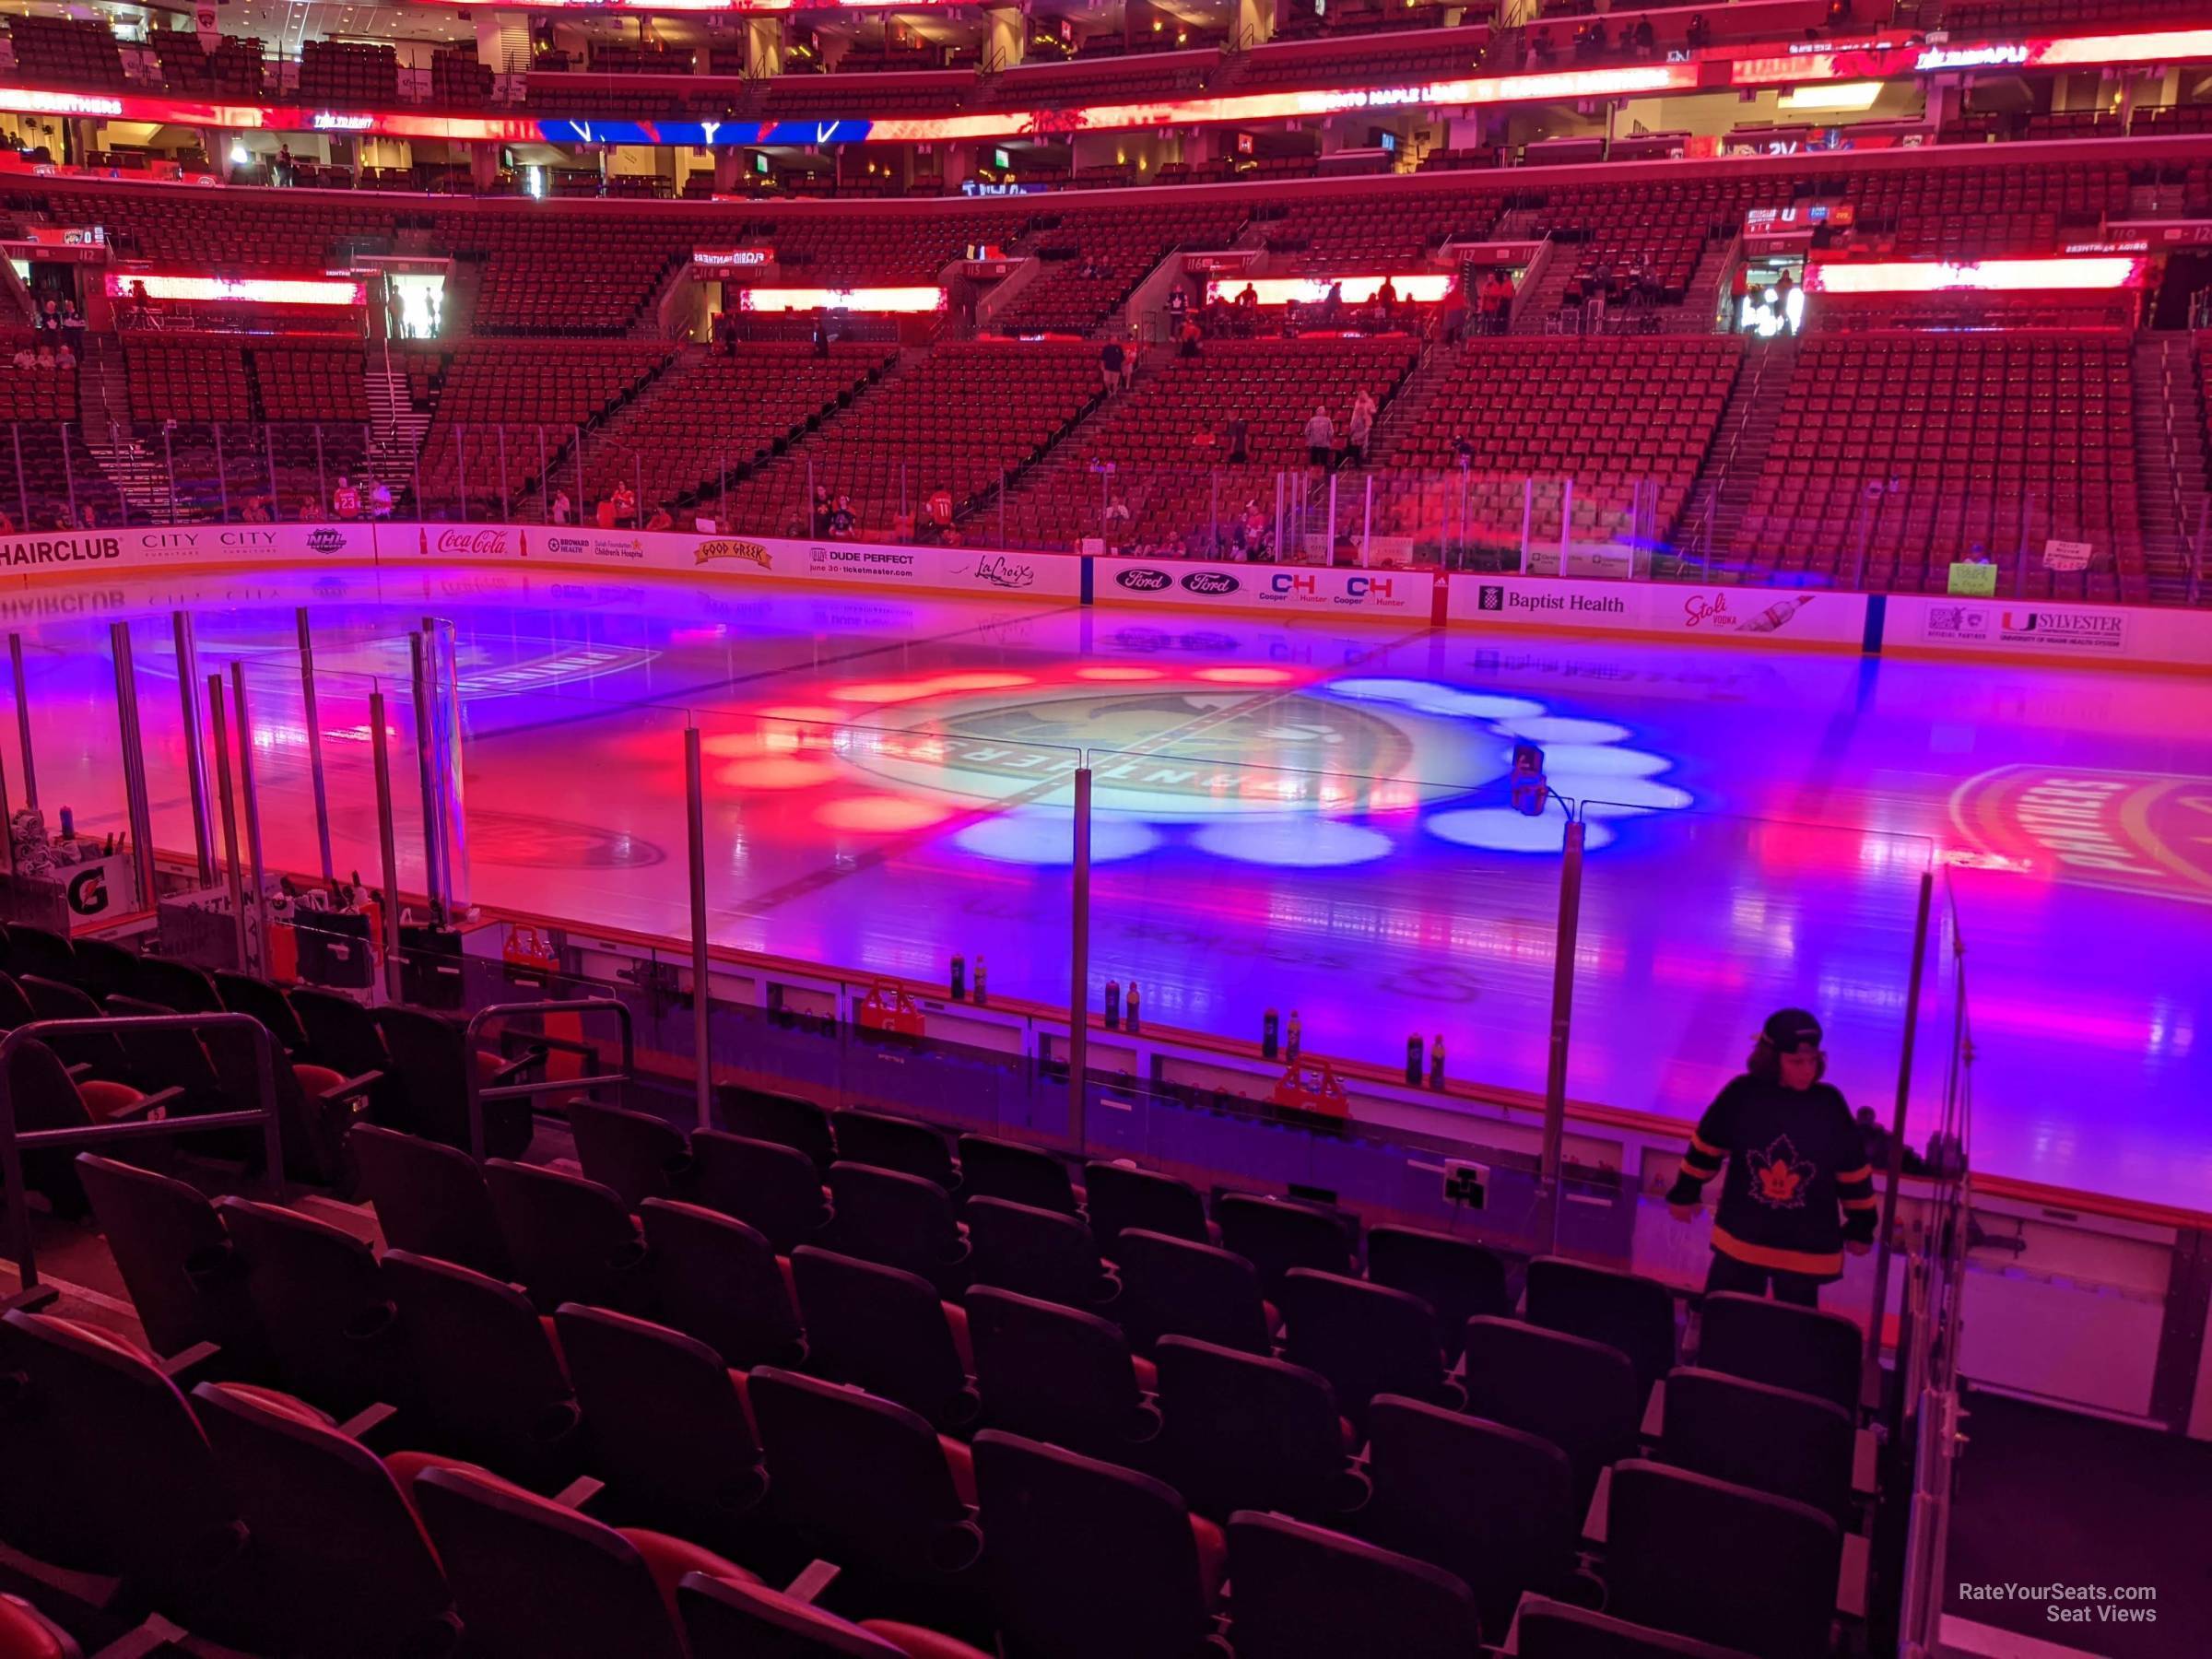 134 lounge 954, row 11 seat view  for hockey - fla live arena